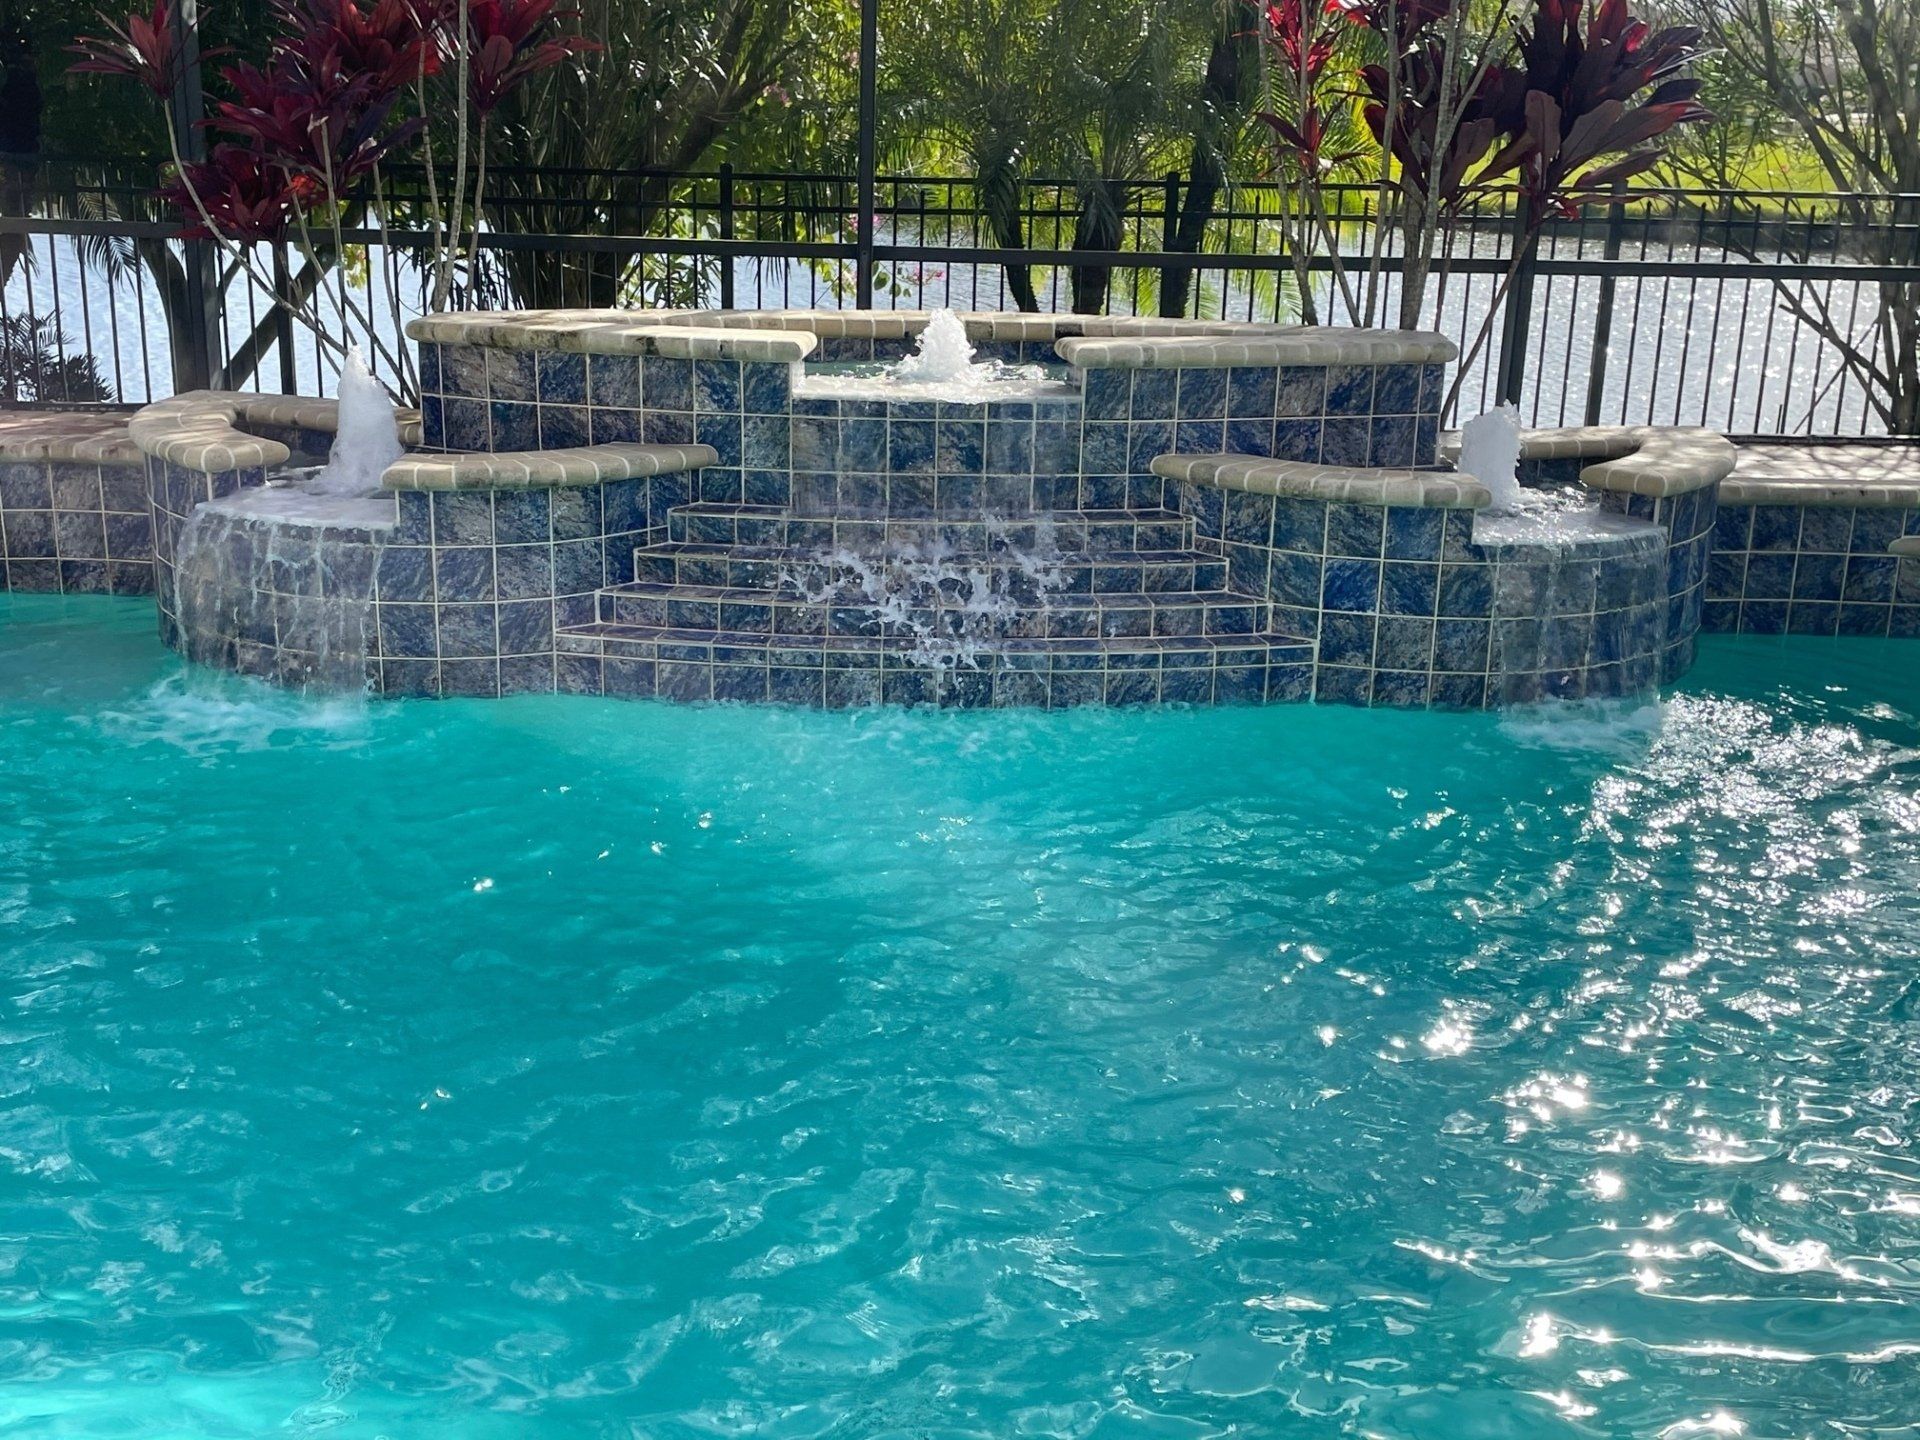 Pool Cleaning Services on North Melbourne, FL